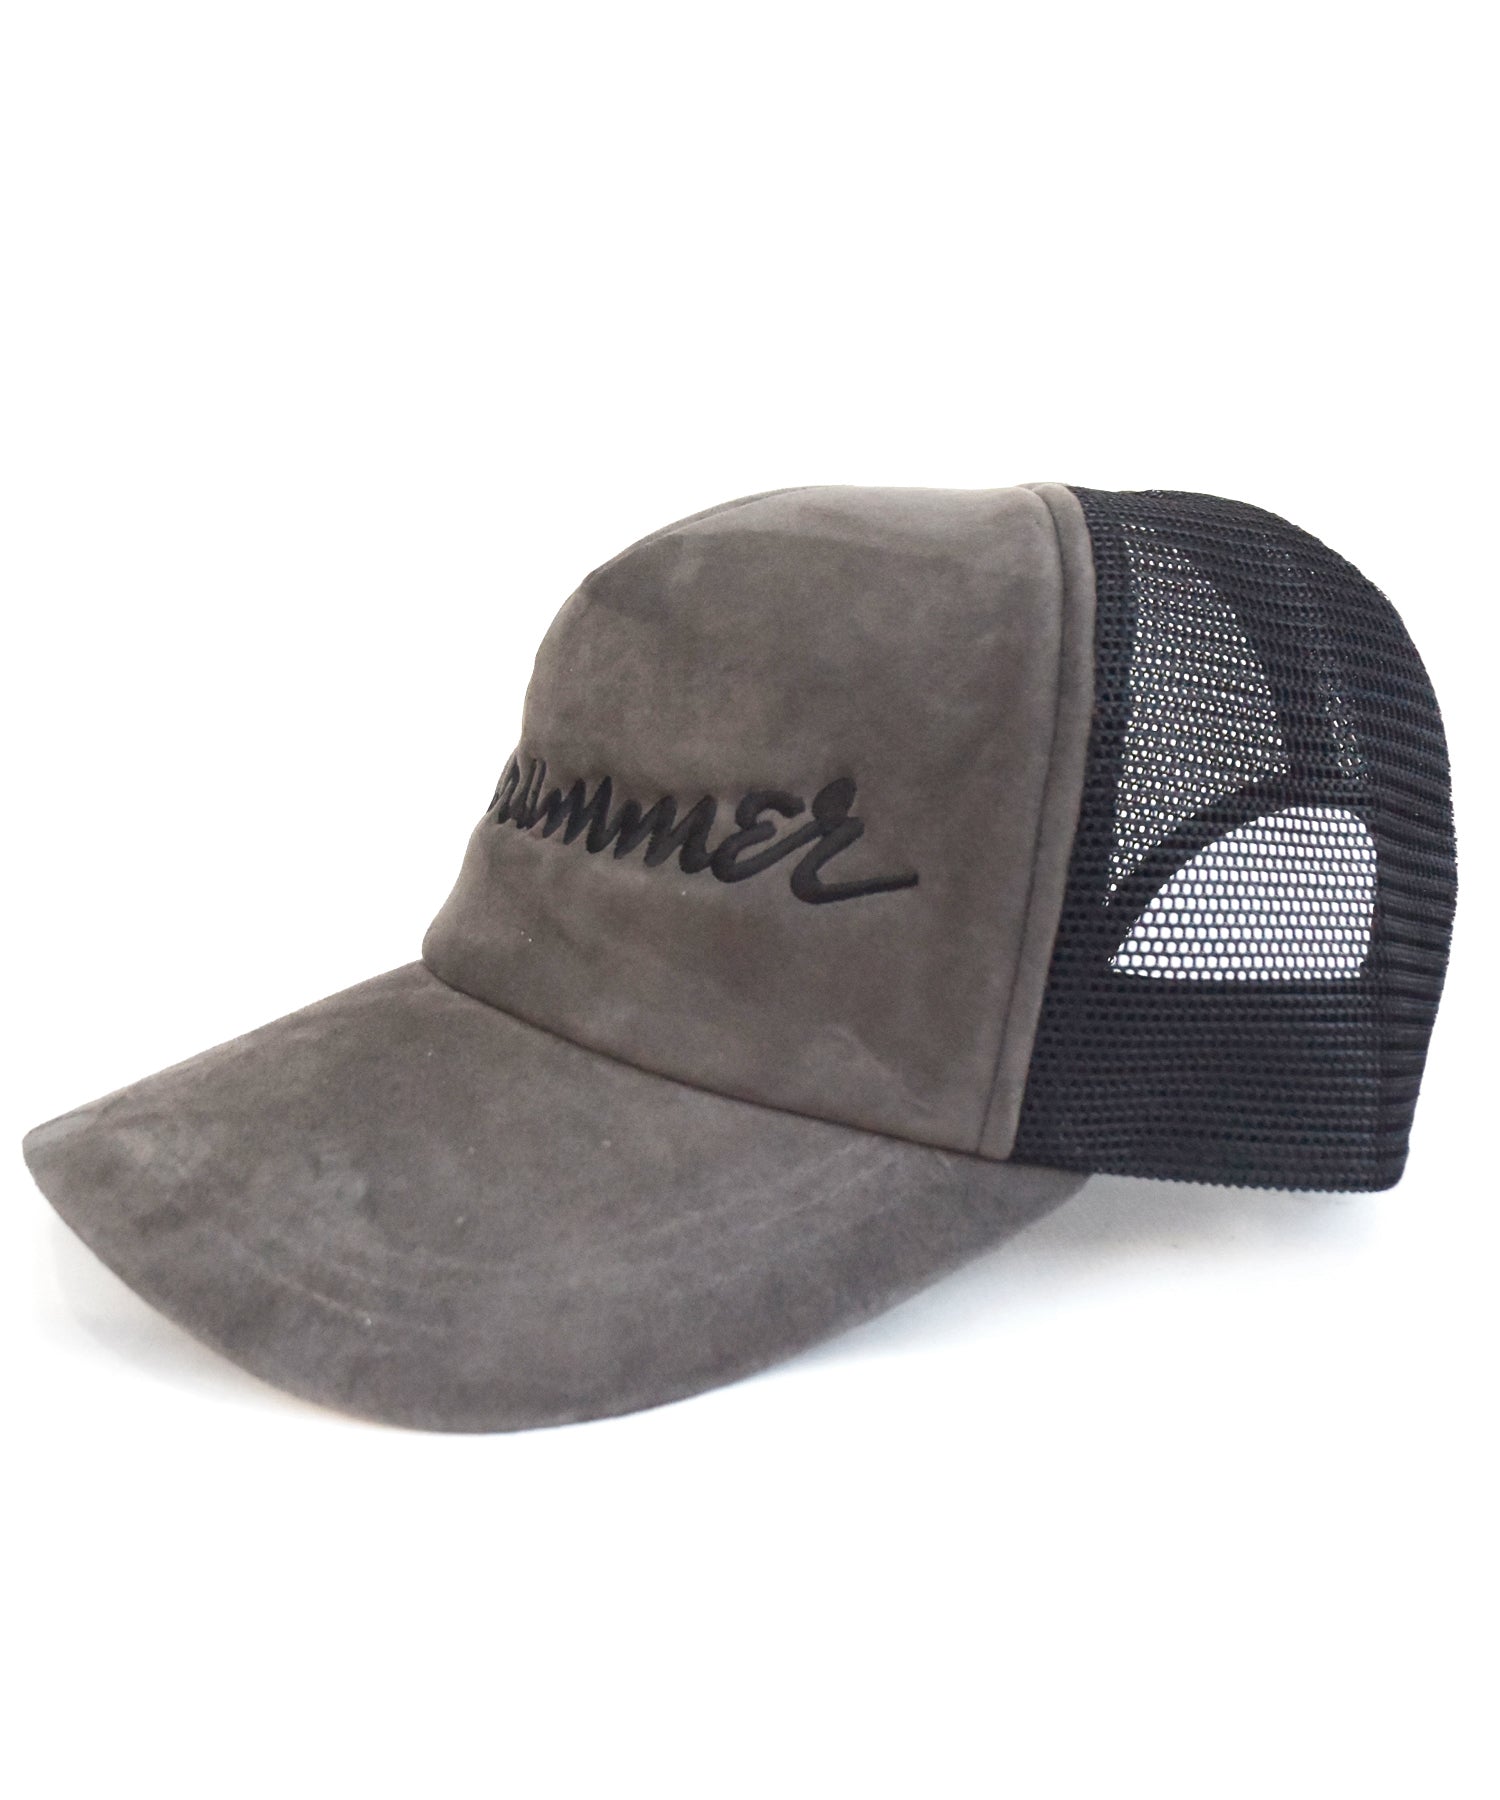 Load image into Gallery viewer, Strummer Leather Cap / GRAY